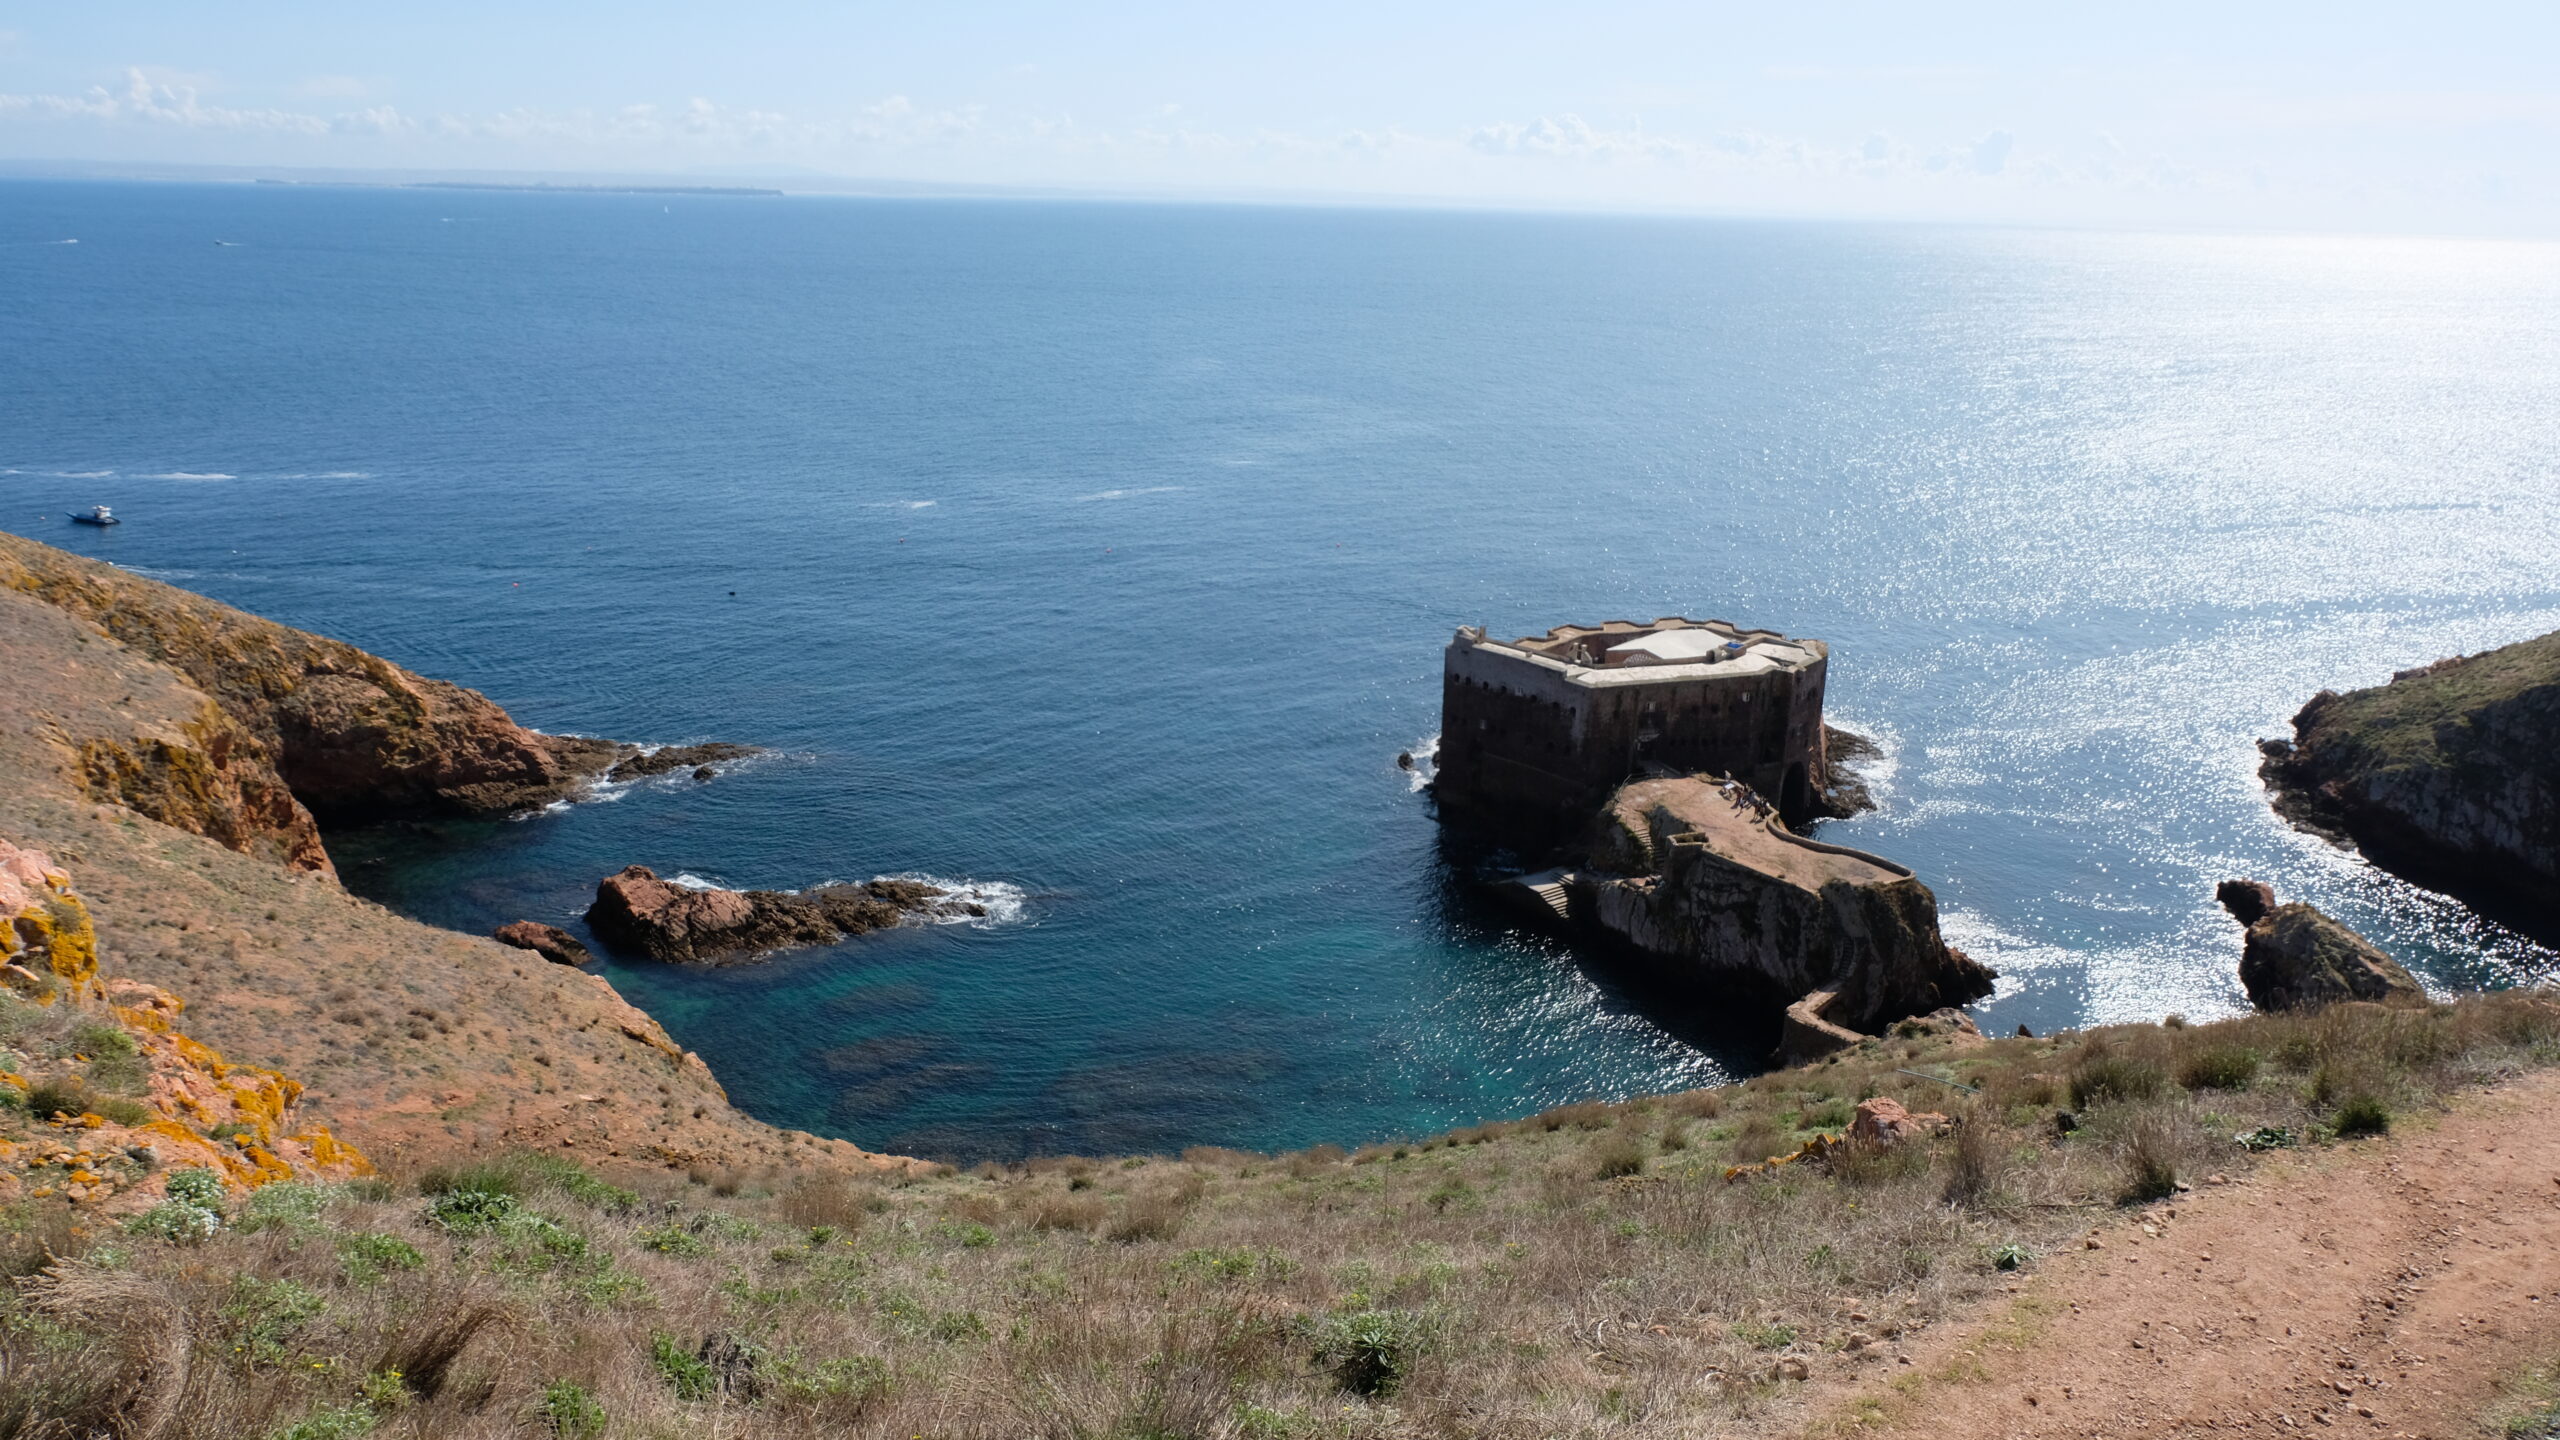 Berlengas tour from Lisbon - Visit the Berlenga Island and the famous fort on a day trip from Lisbon